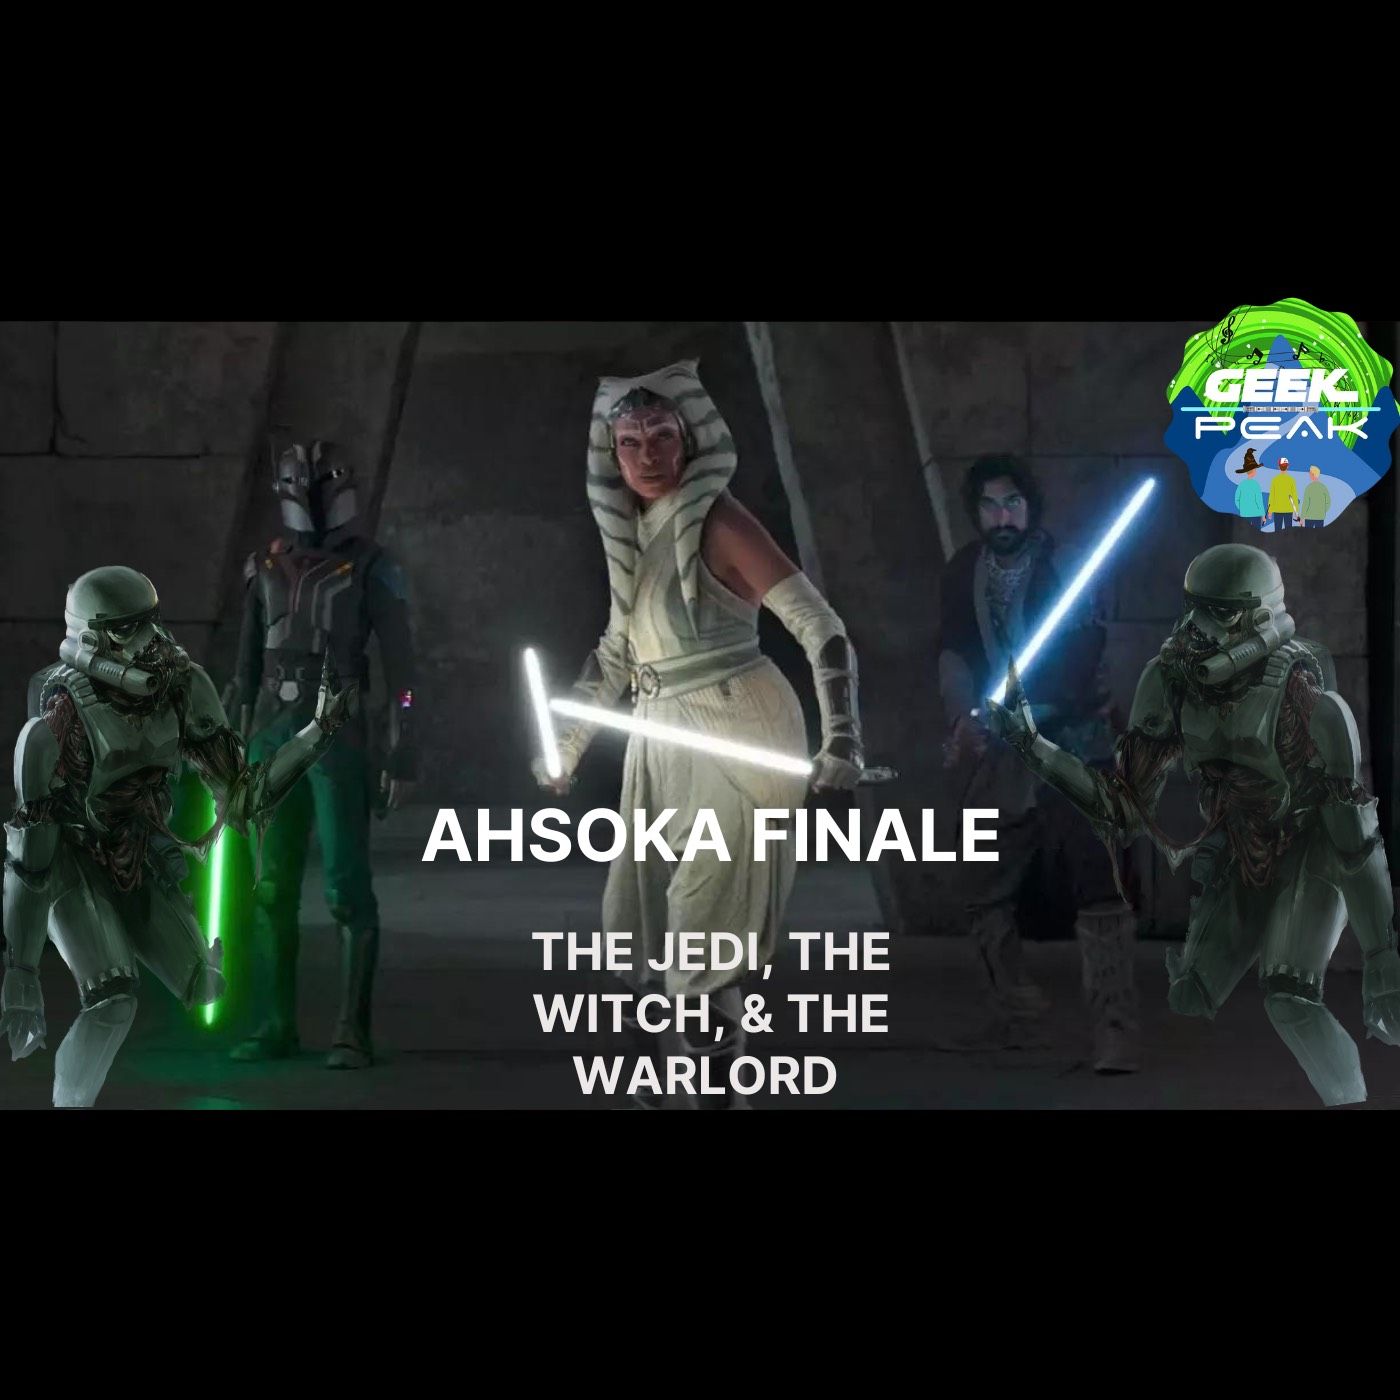 Ahsoka S1 Finale: The Jedi, The Witch, & The Warlord